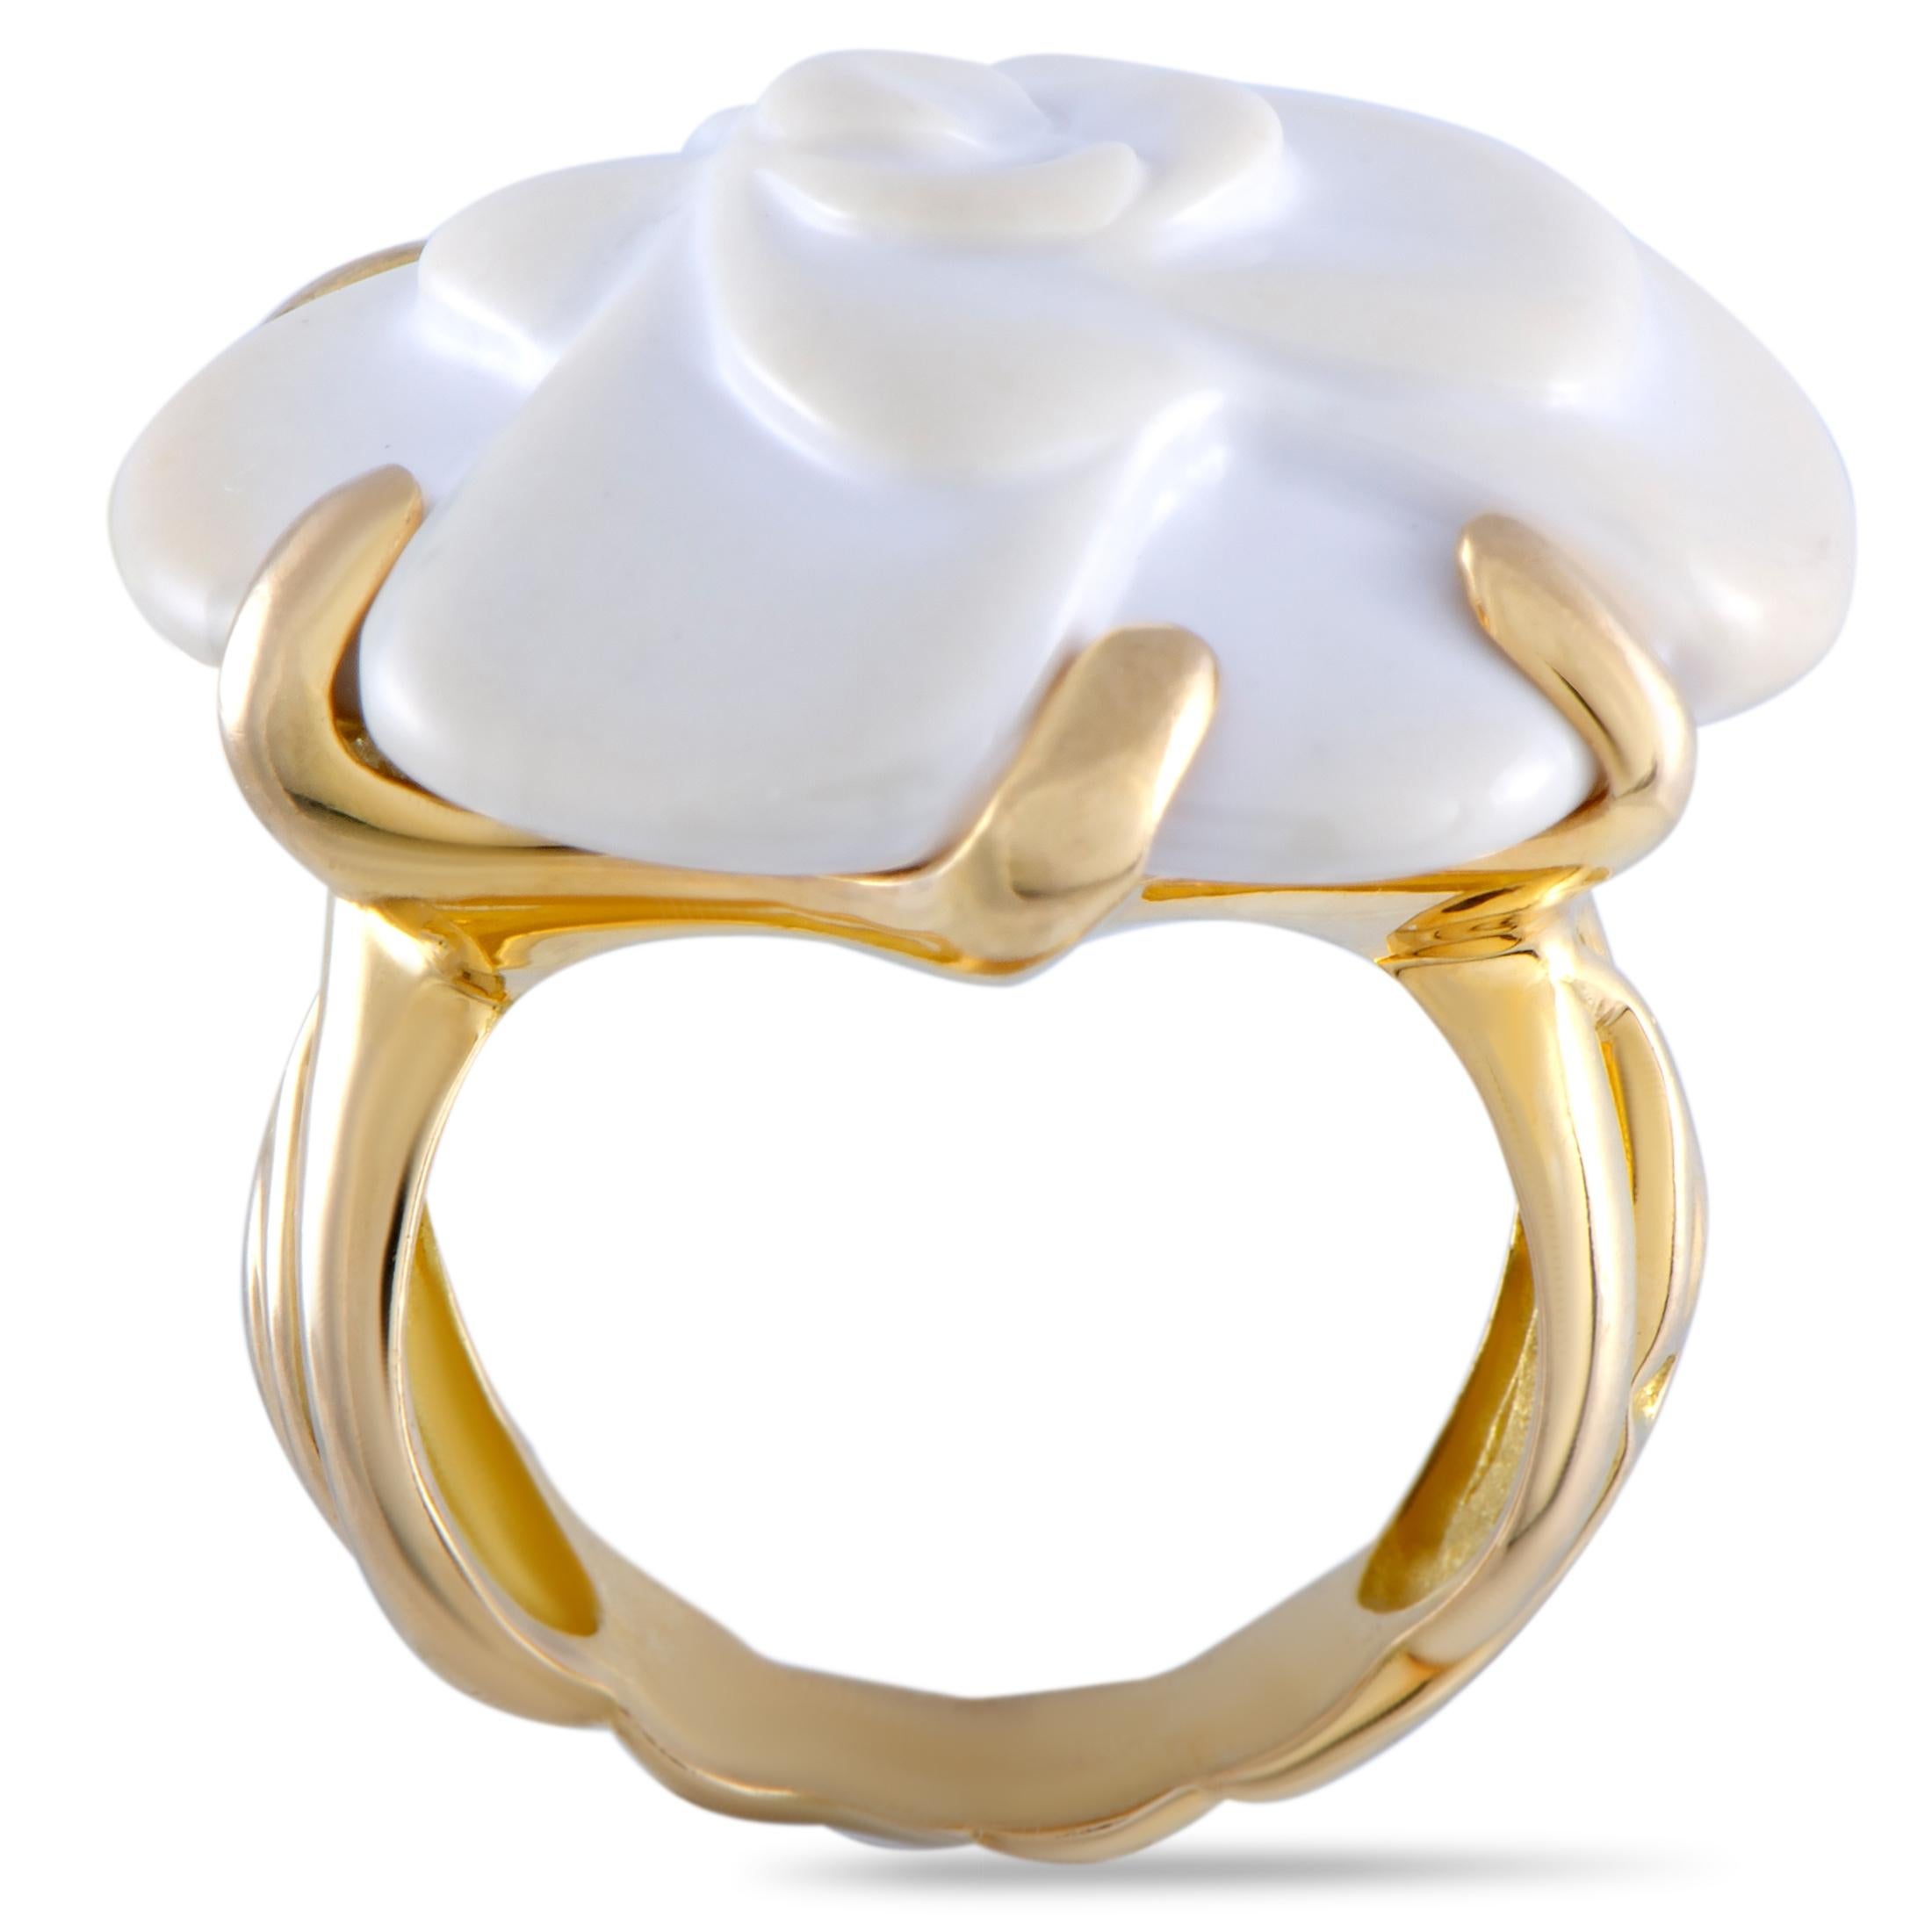 Embrace sensual femininity by accessorizing your ensembles with this gorgeous Chanel ring set with a stunning white agate that takes the form of a graceful camellia. The ring is beautifully made of luxe 18K yellow gold and it weighs 13.3